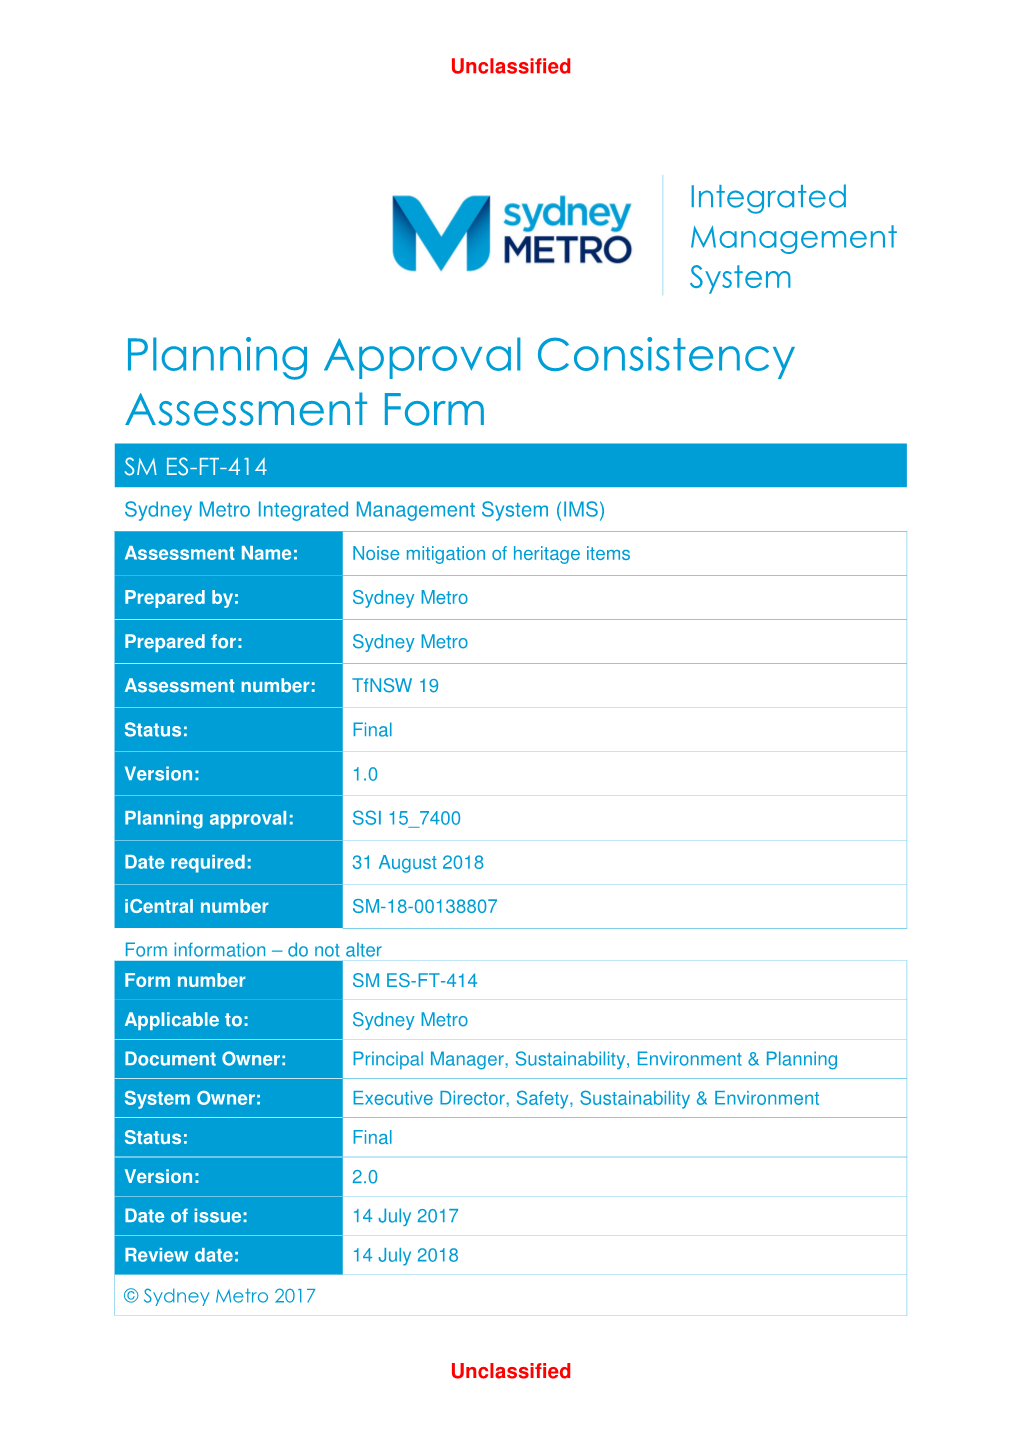 Planning Approval Consistency Assessment Form